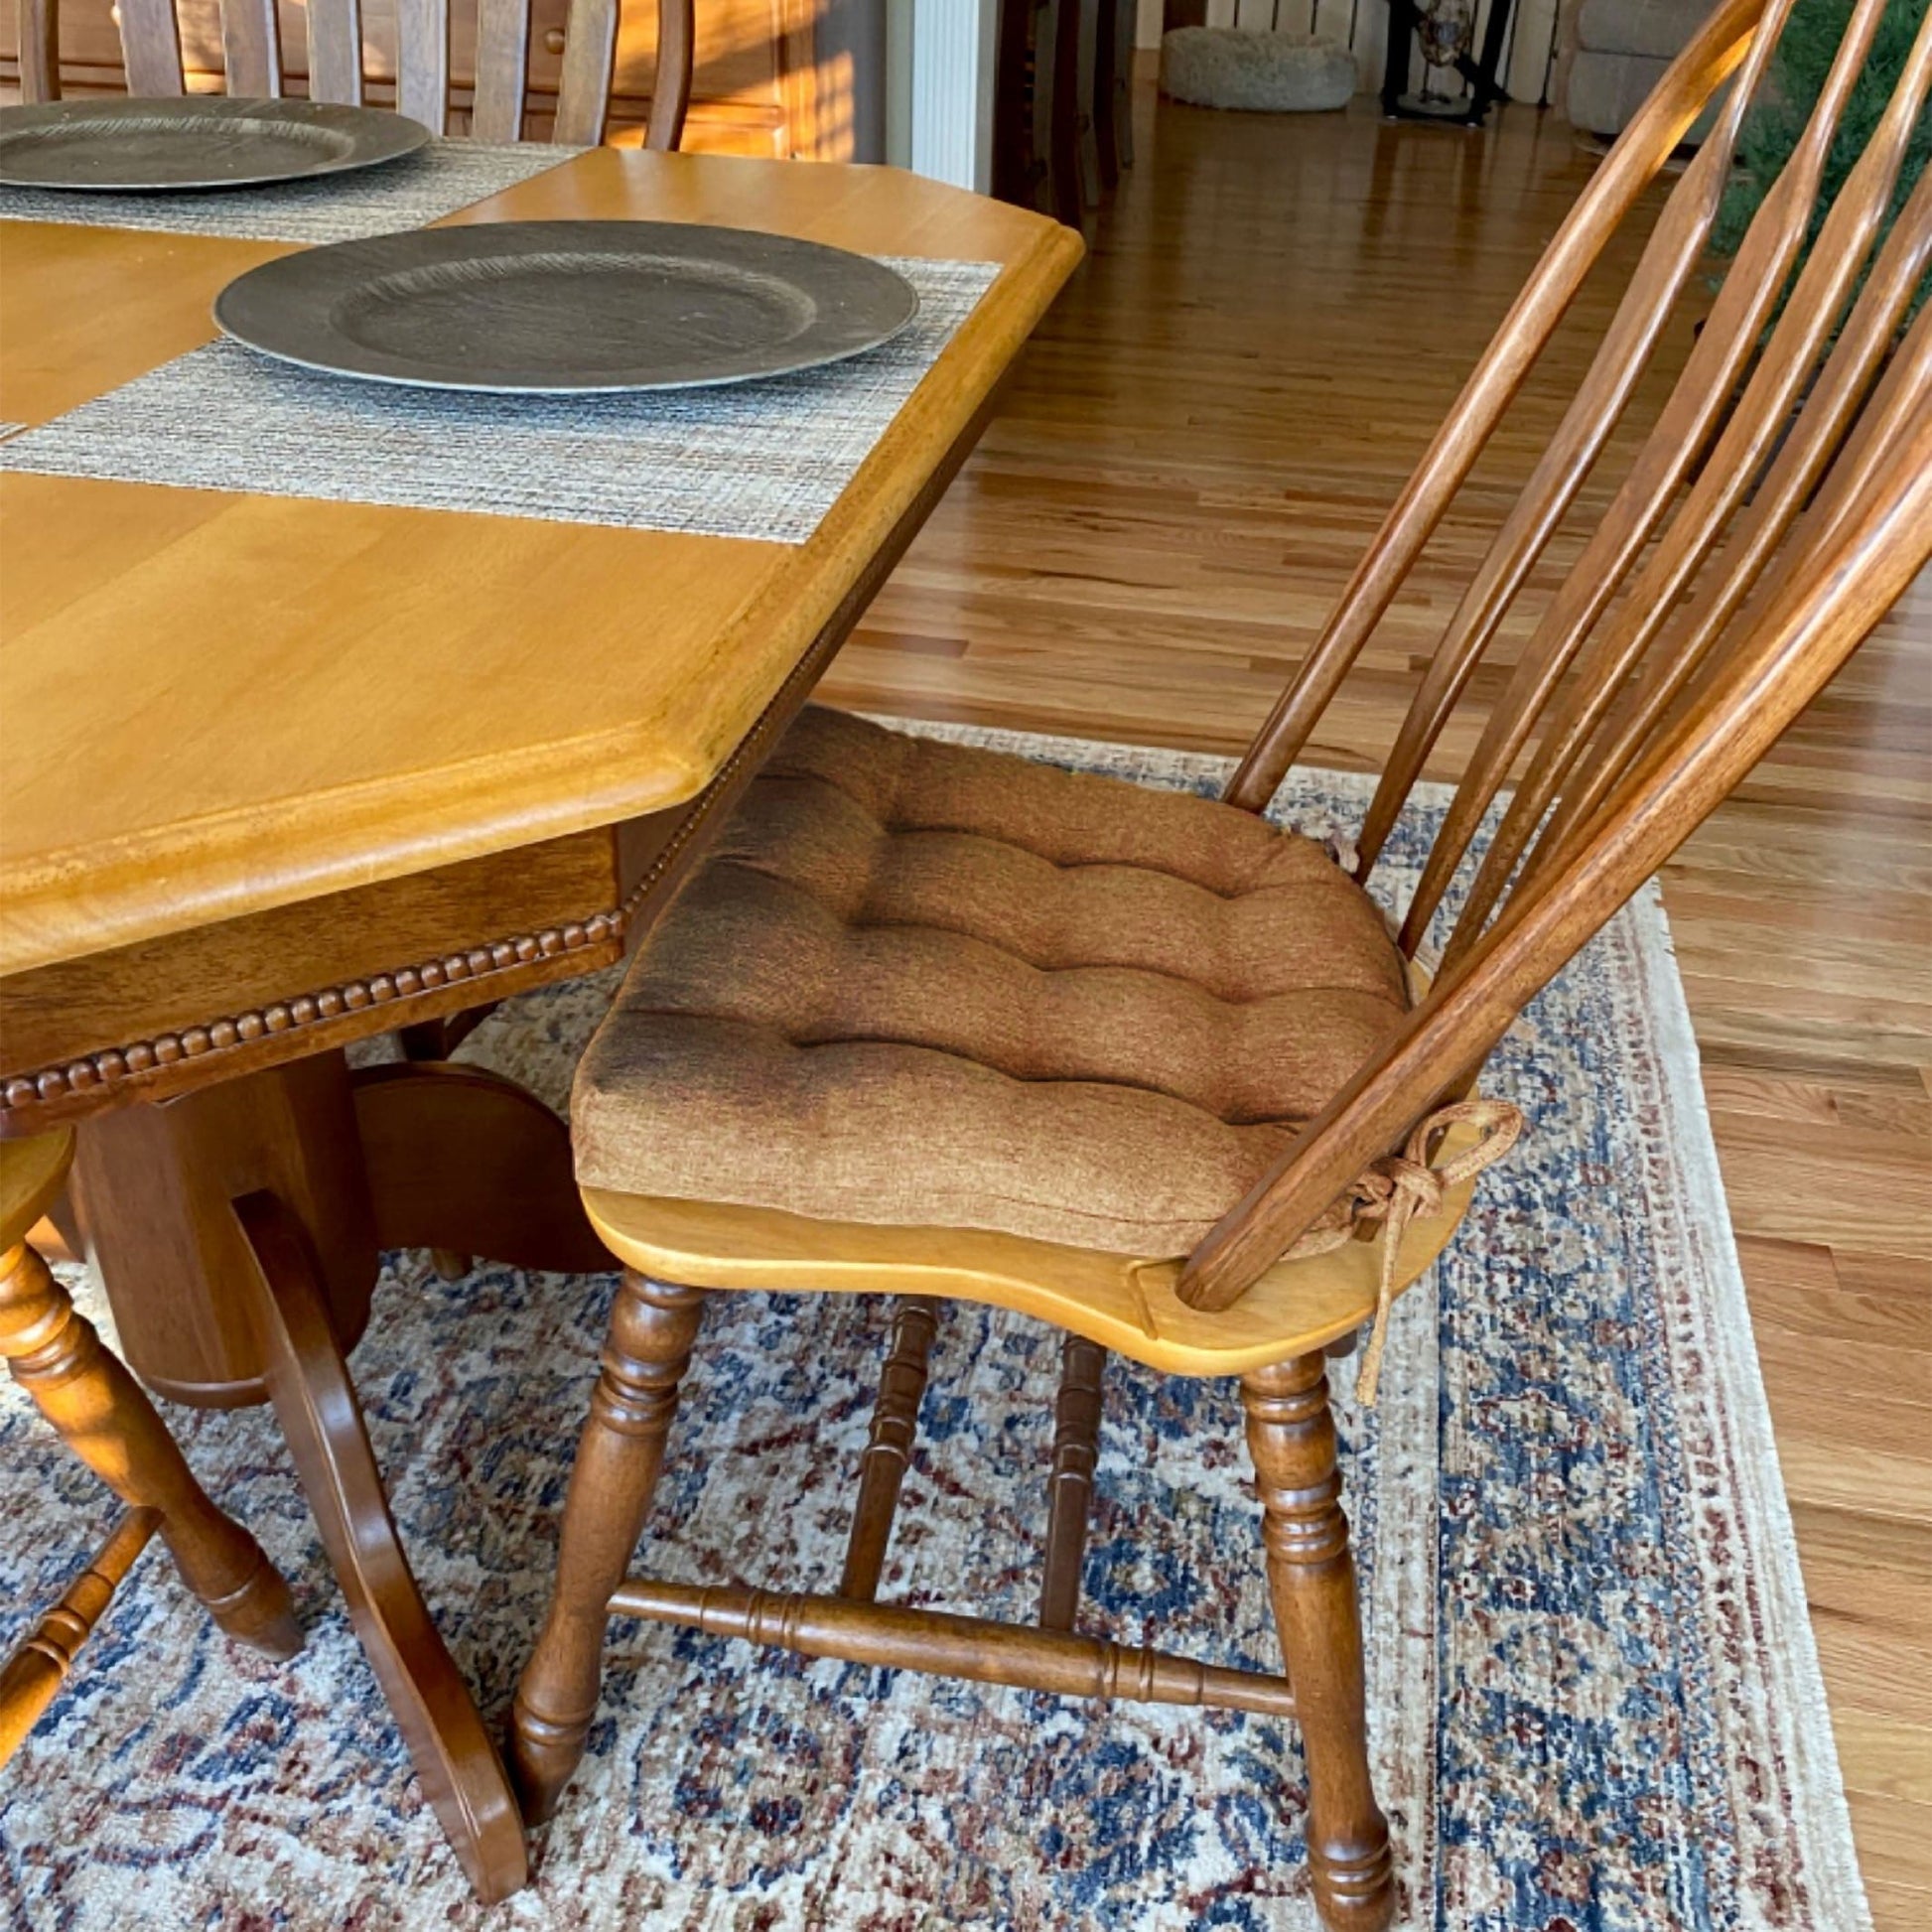 Upholstery - What I Learned From Hiring It Out  Fabric dining room chairs,  Blue upholstered chair, Dining room chair cushions